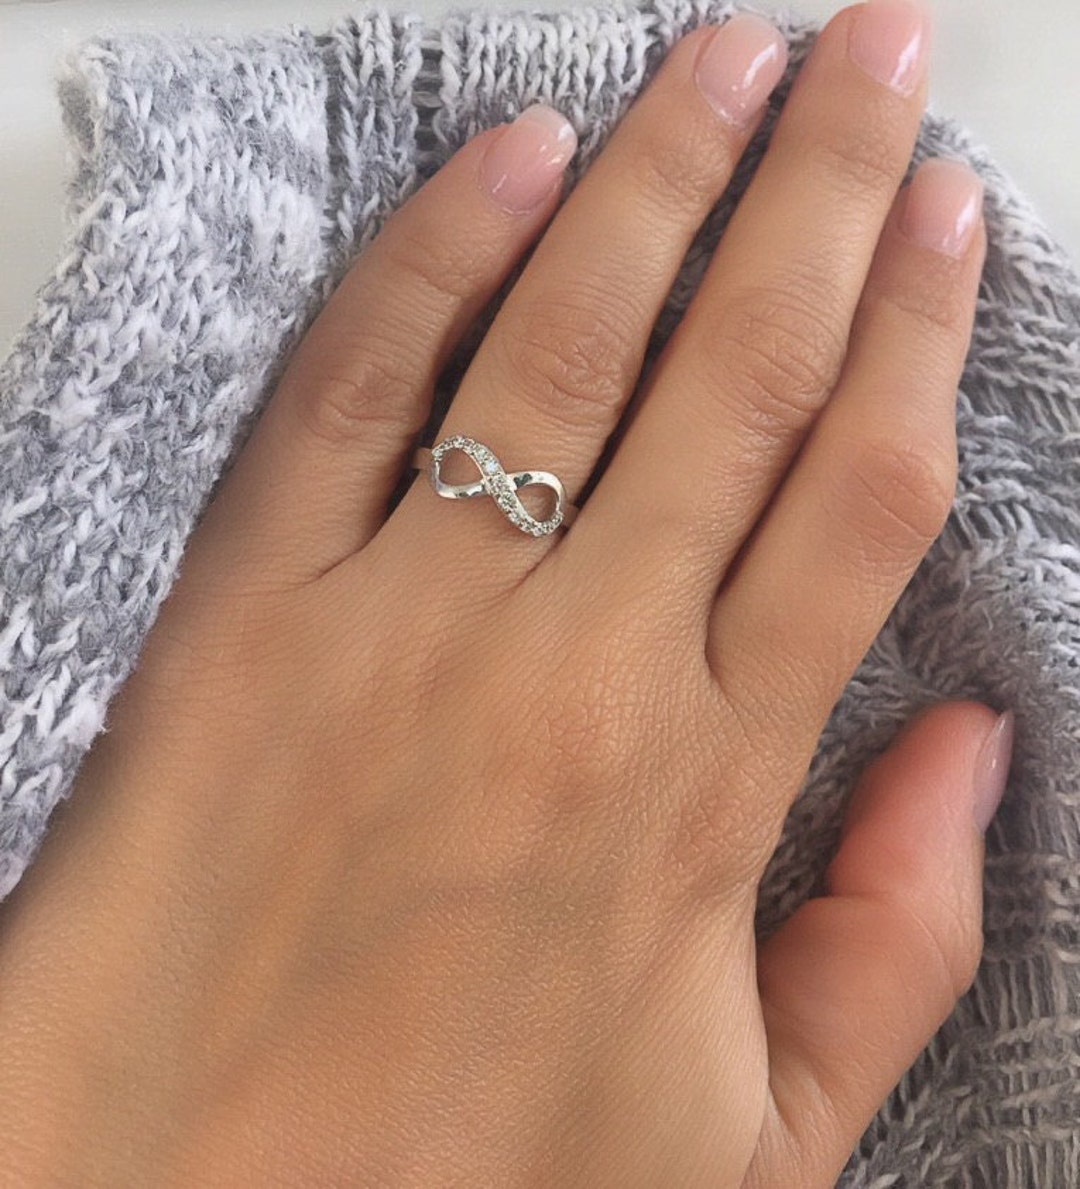 Customized Infinity Silver Ring